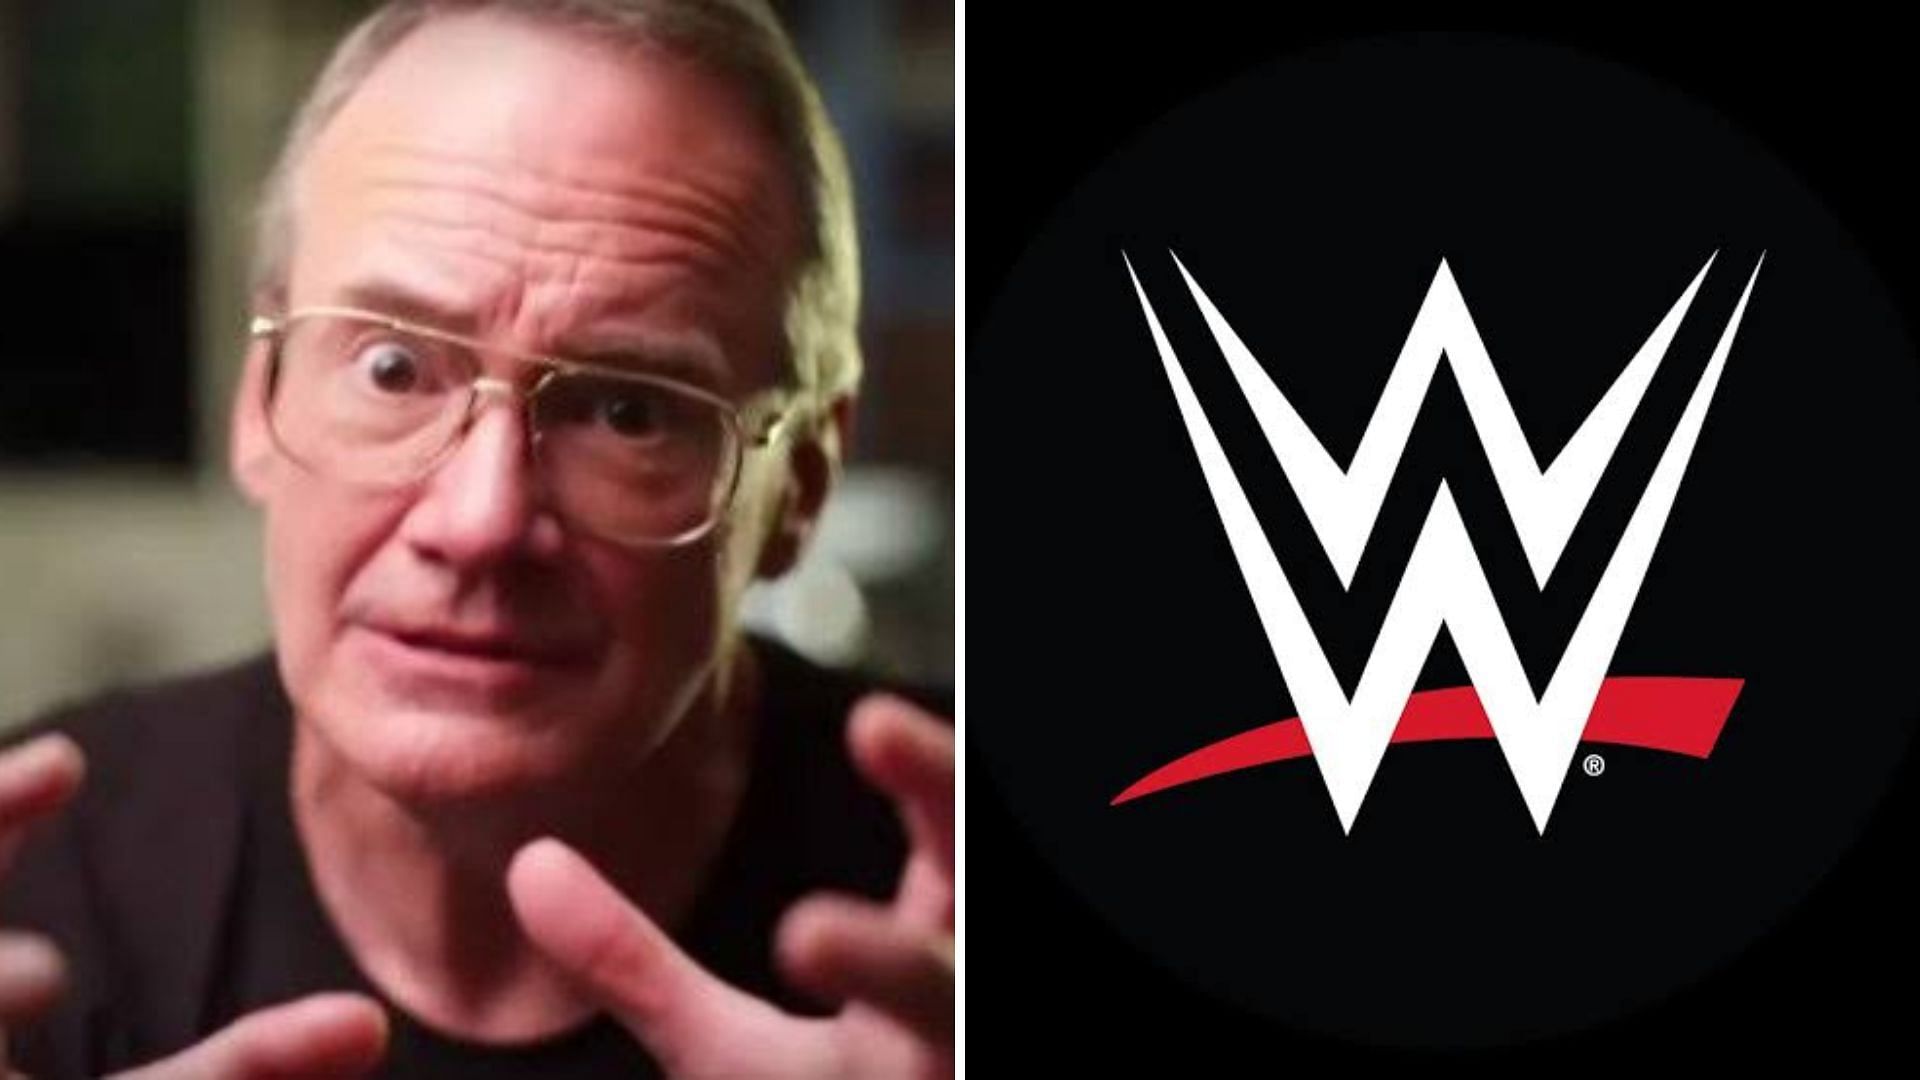 The wrestling veteran is a vocal critic of All Elite Wrestling